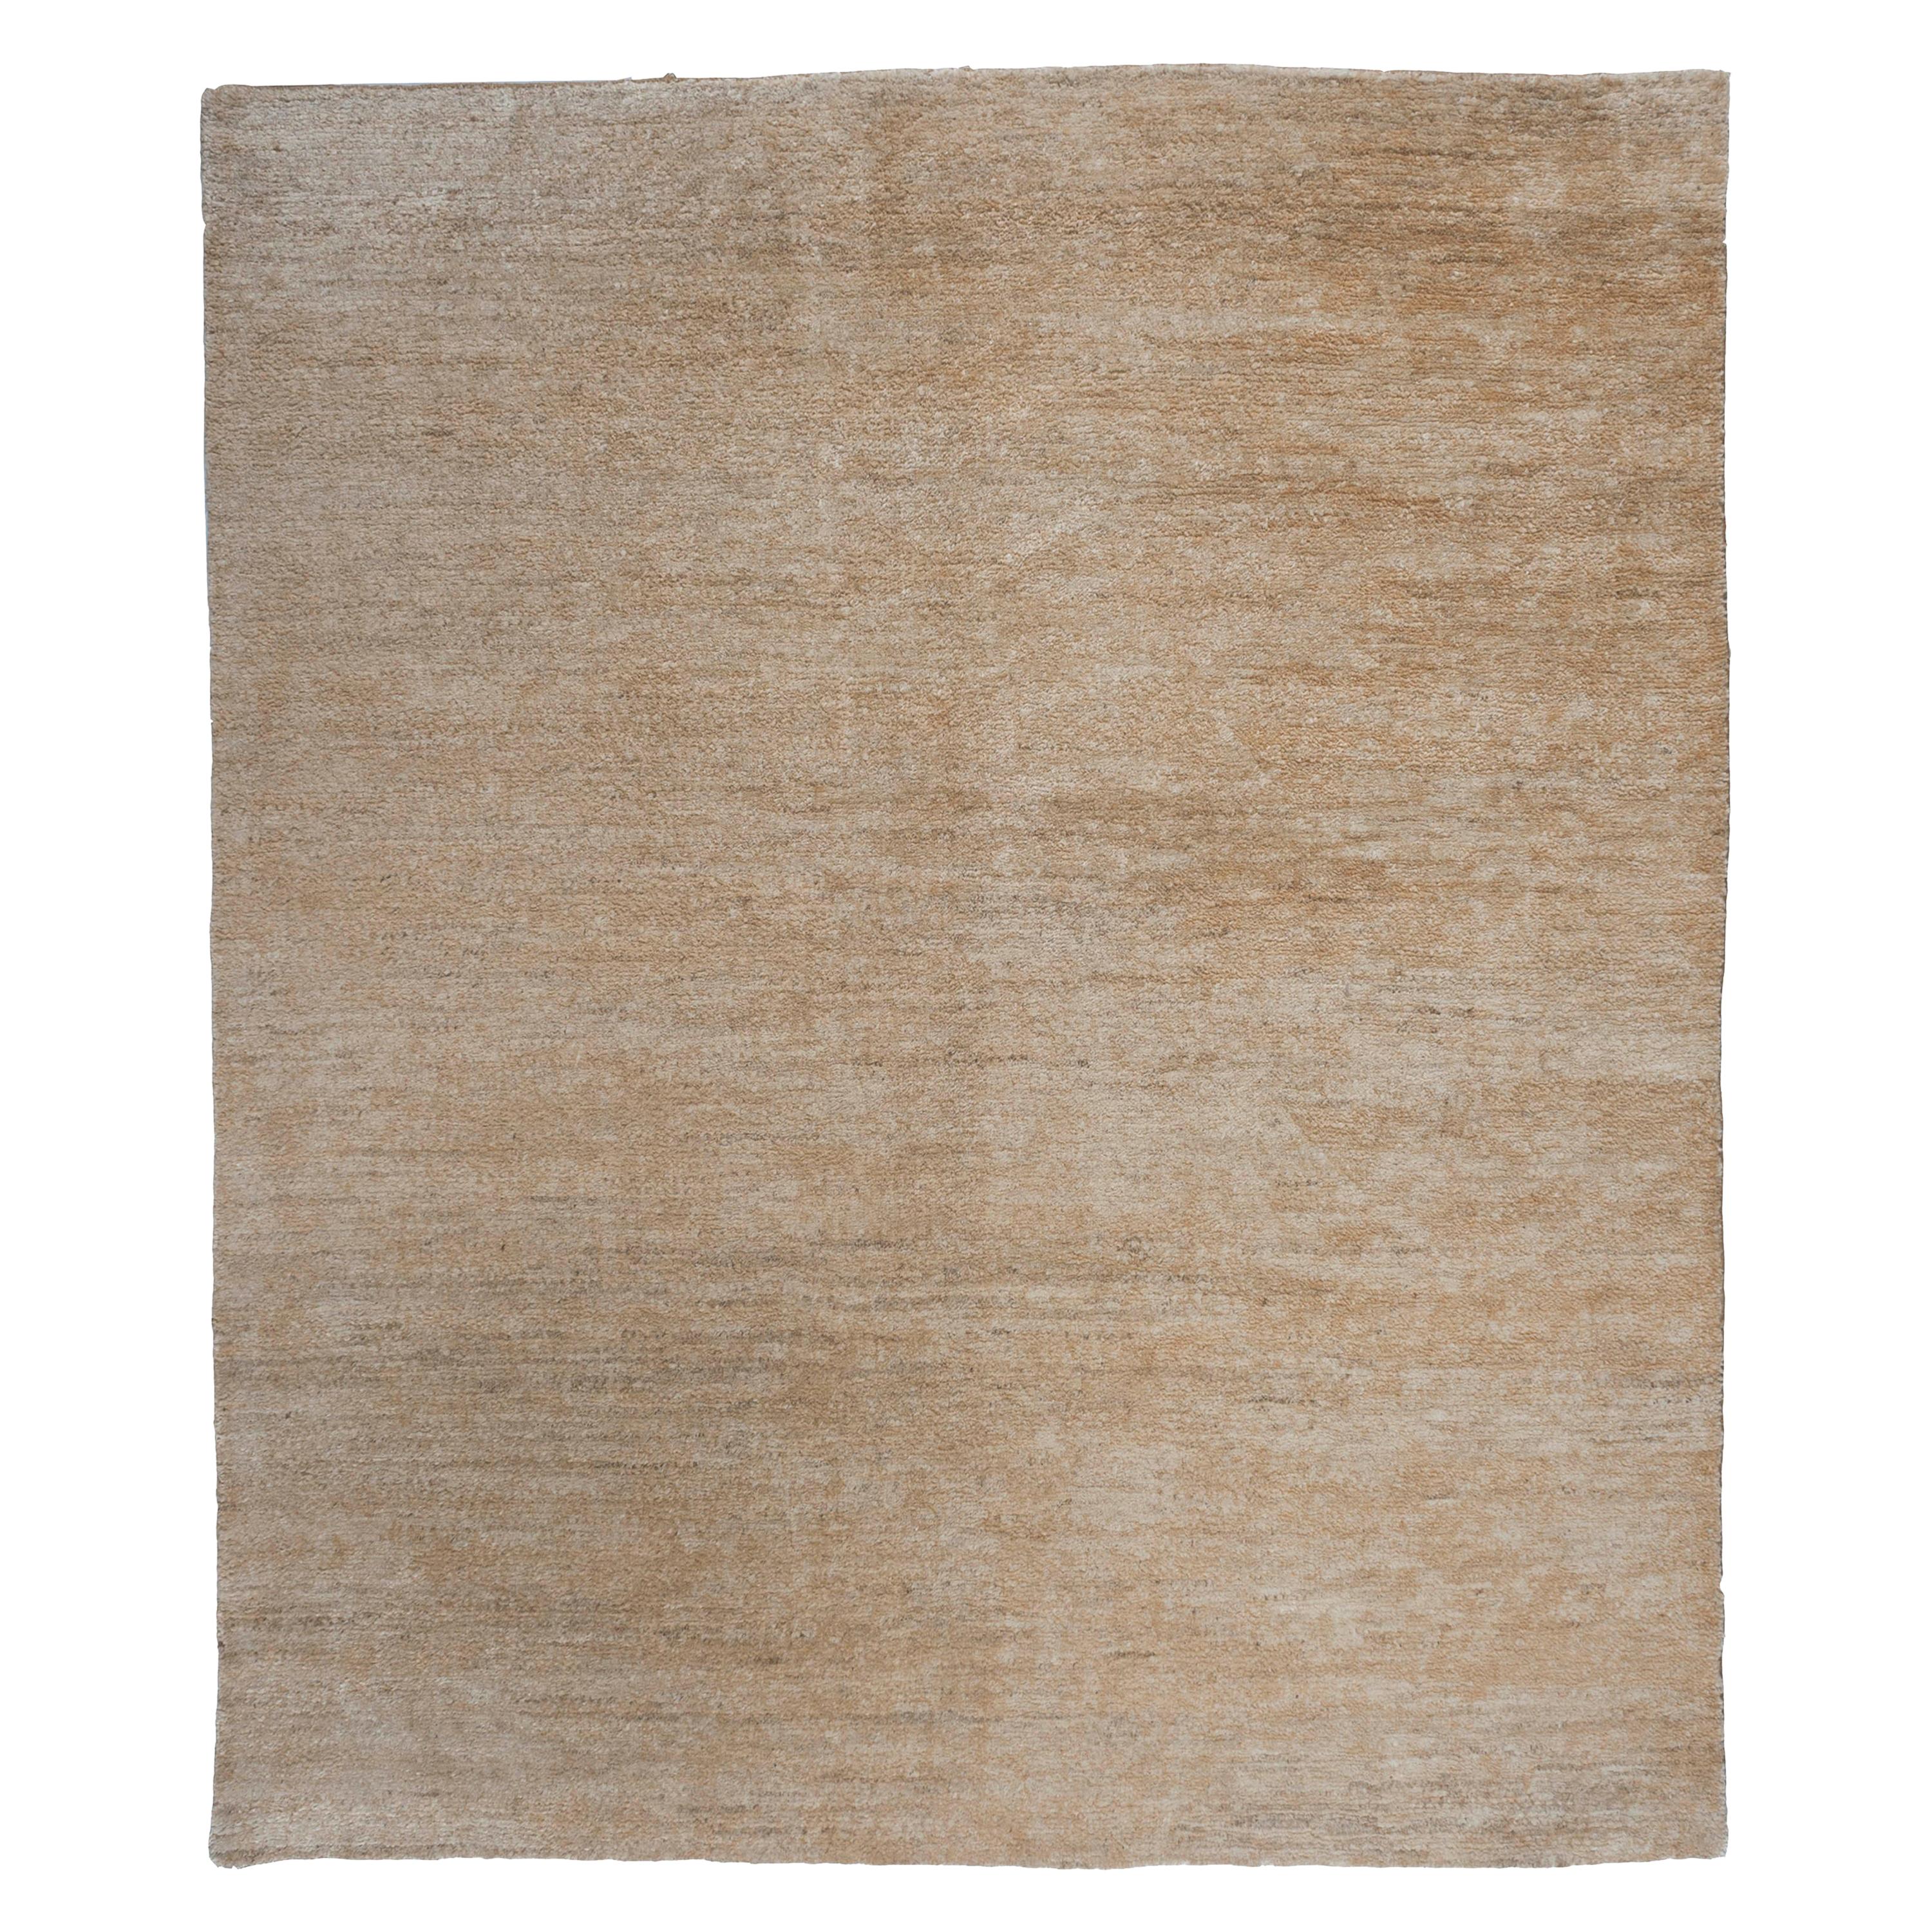 Brown and Cream Hemp Area Rug For Sale